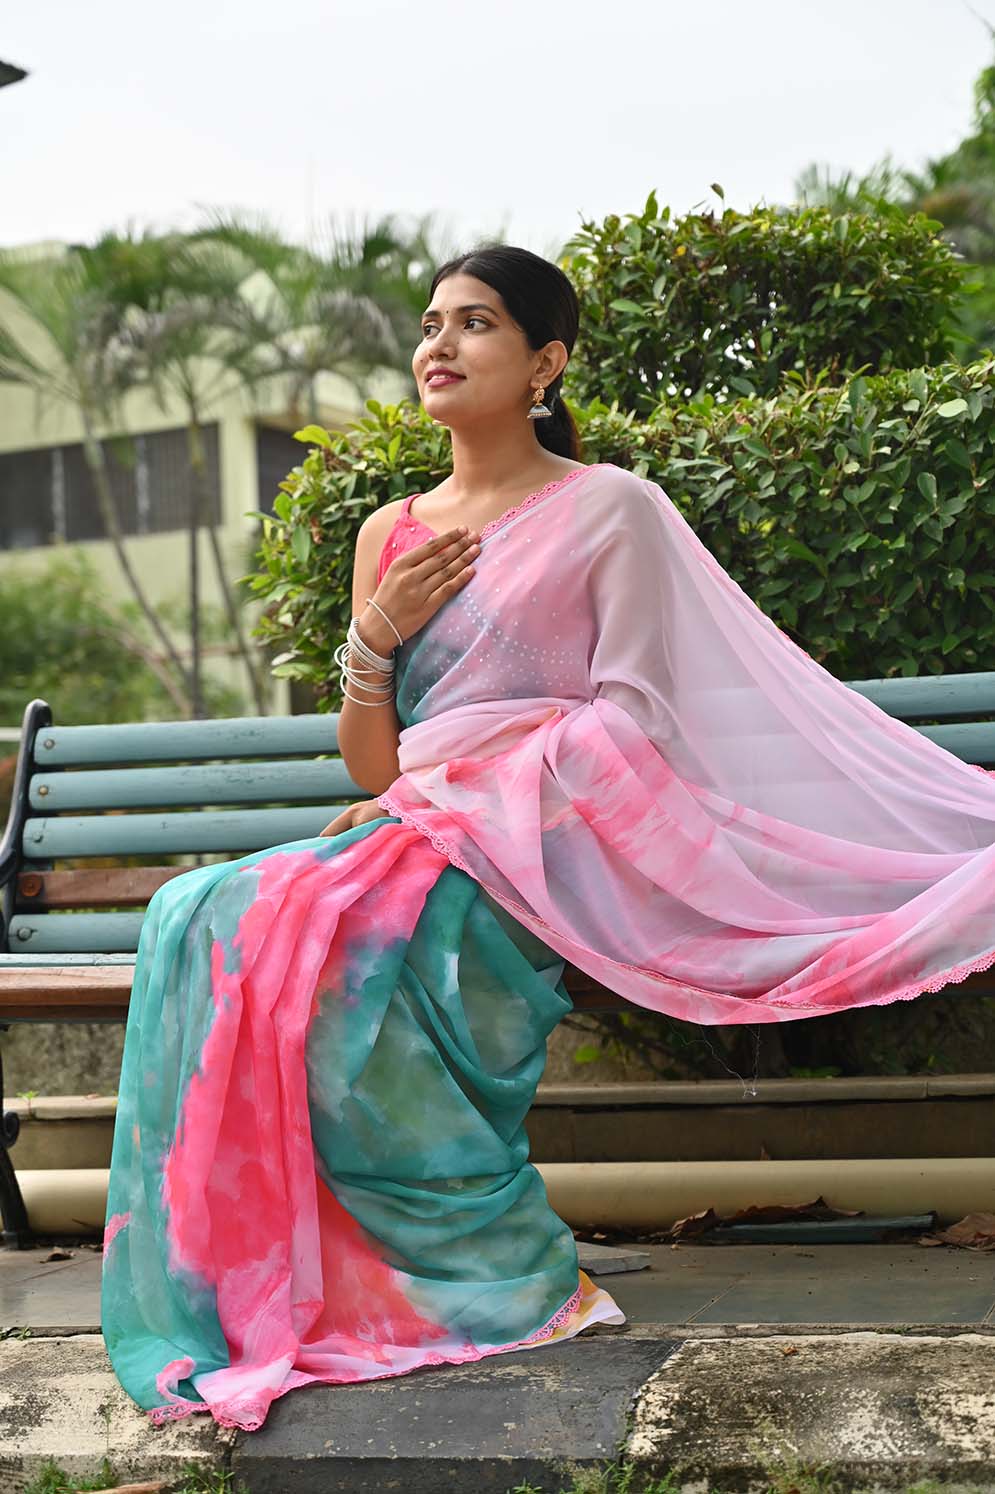 How To Recreate Alia Bhatts Pink Saree Look On A Budget